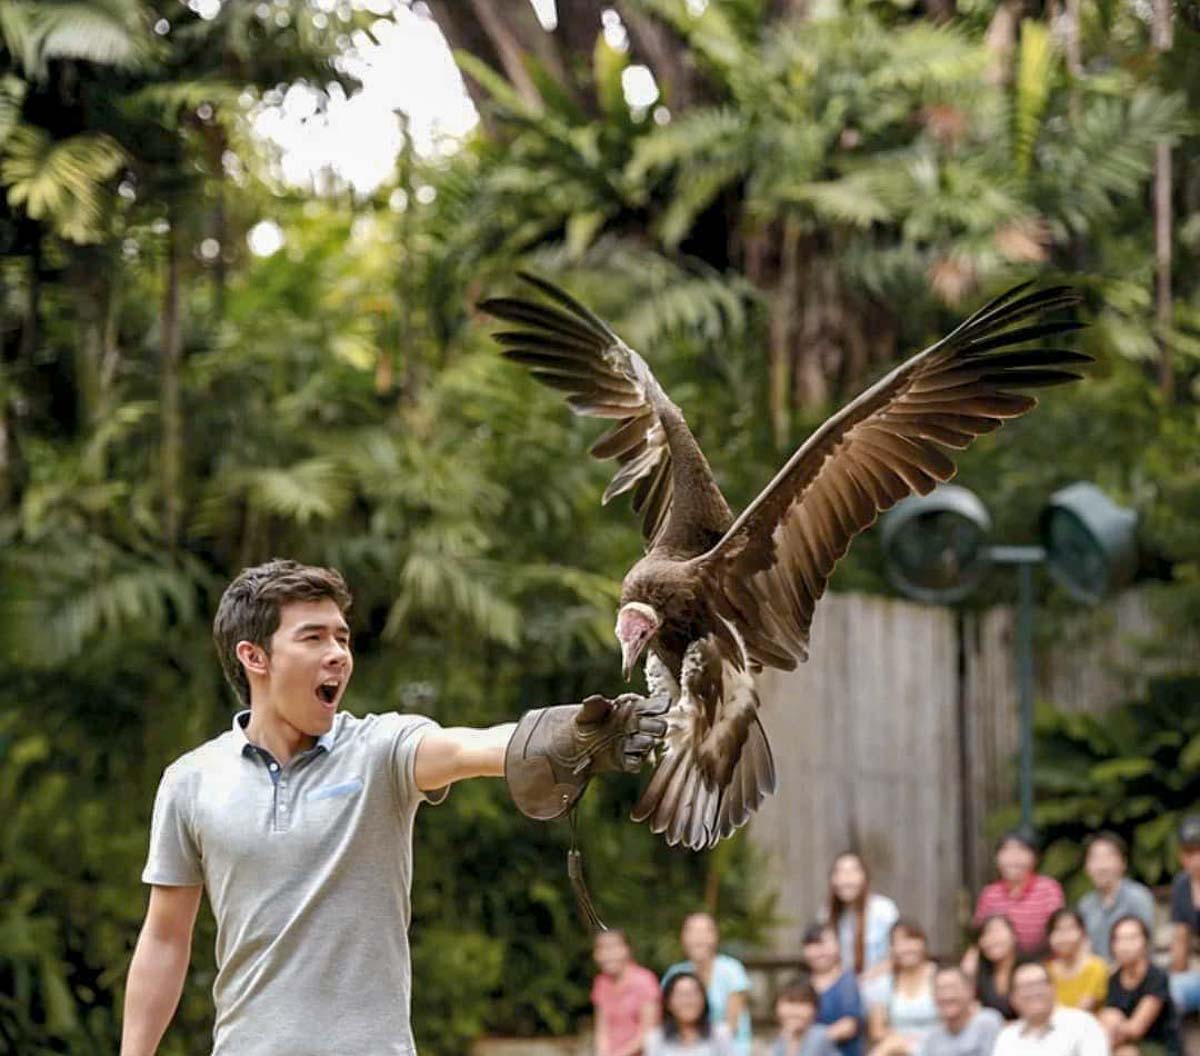 Jurong Bird Park King of the Skies Bird Show - Singapore Attractions